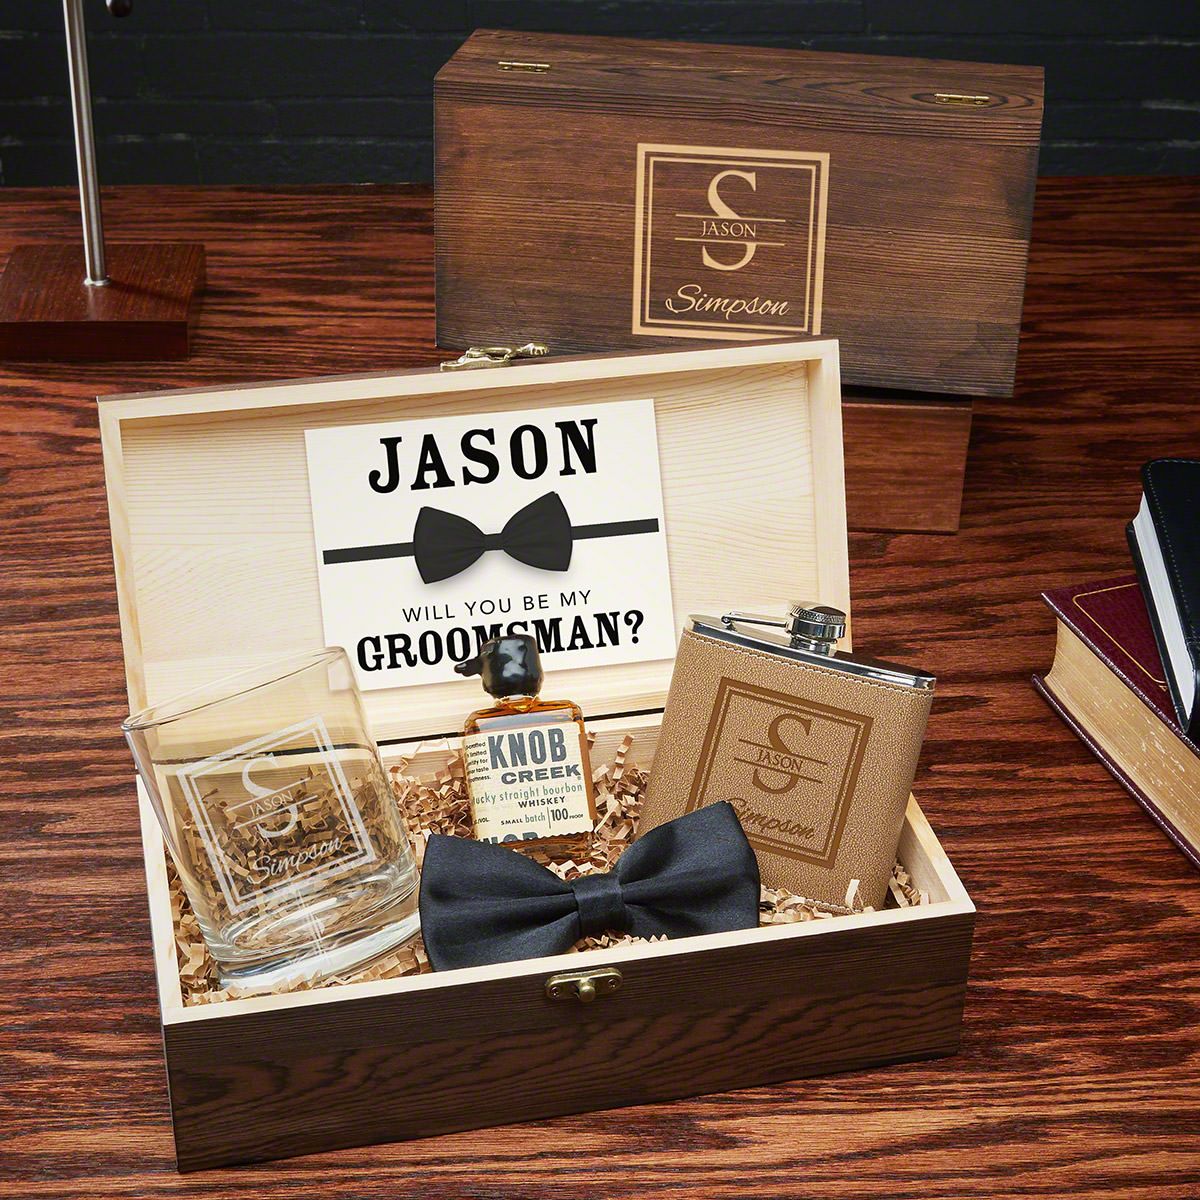 https://images.homewetbar.com/media/catalog/product/7/0/7093-oakhill-personalized-best-man-gift-box-set-flask-whiskey-glass-bowtie-up-7-23.jpg?store=default&image-type=image